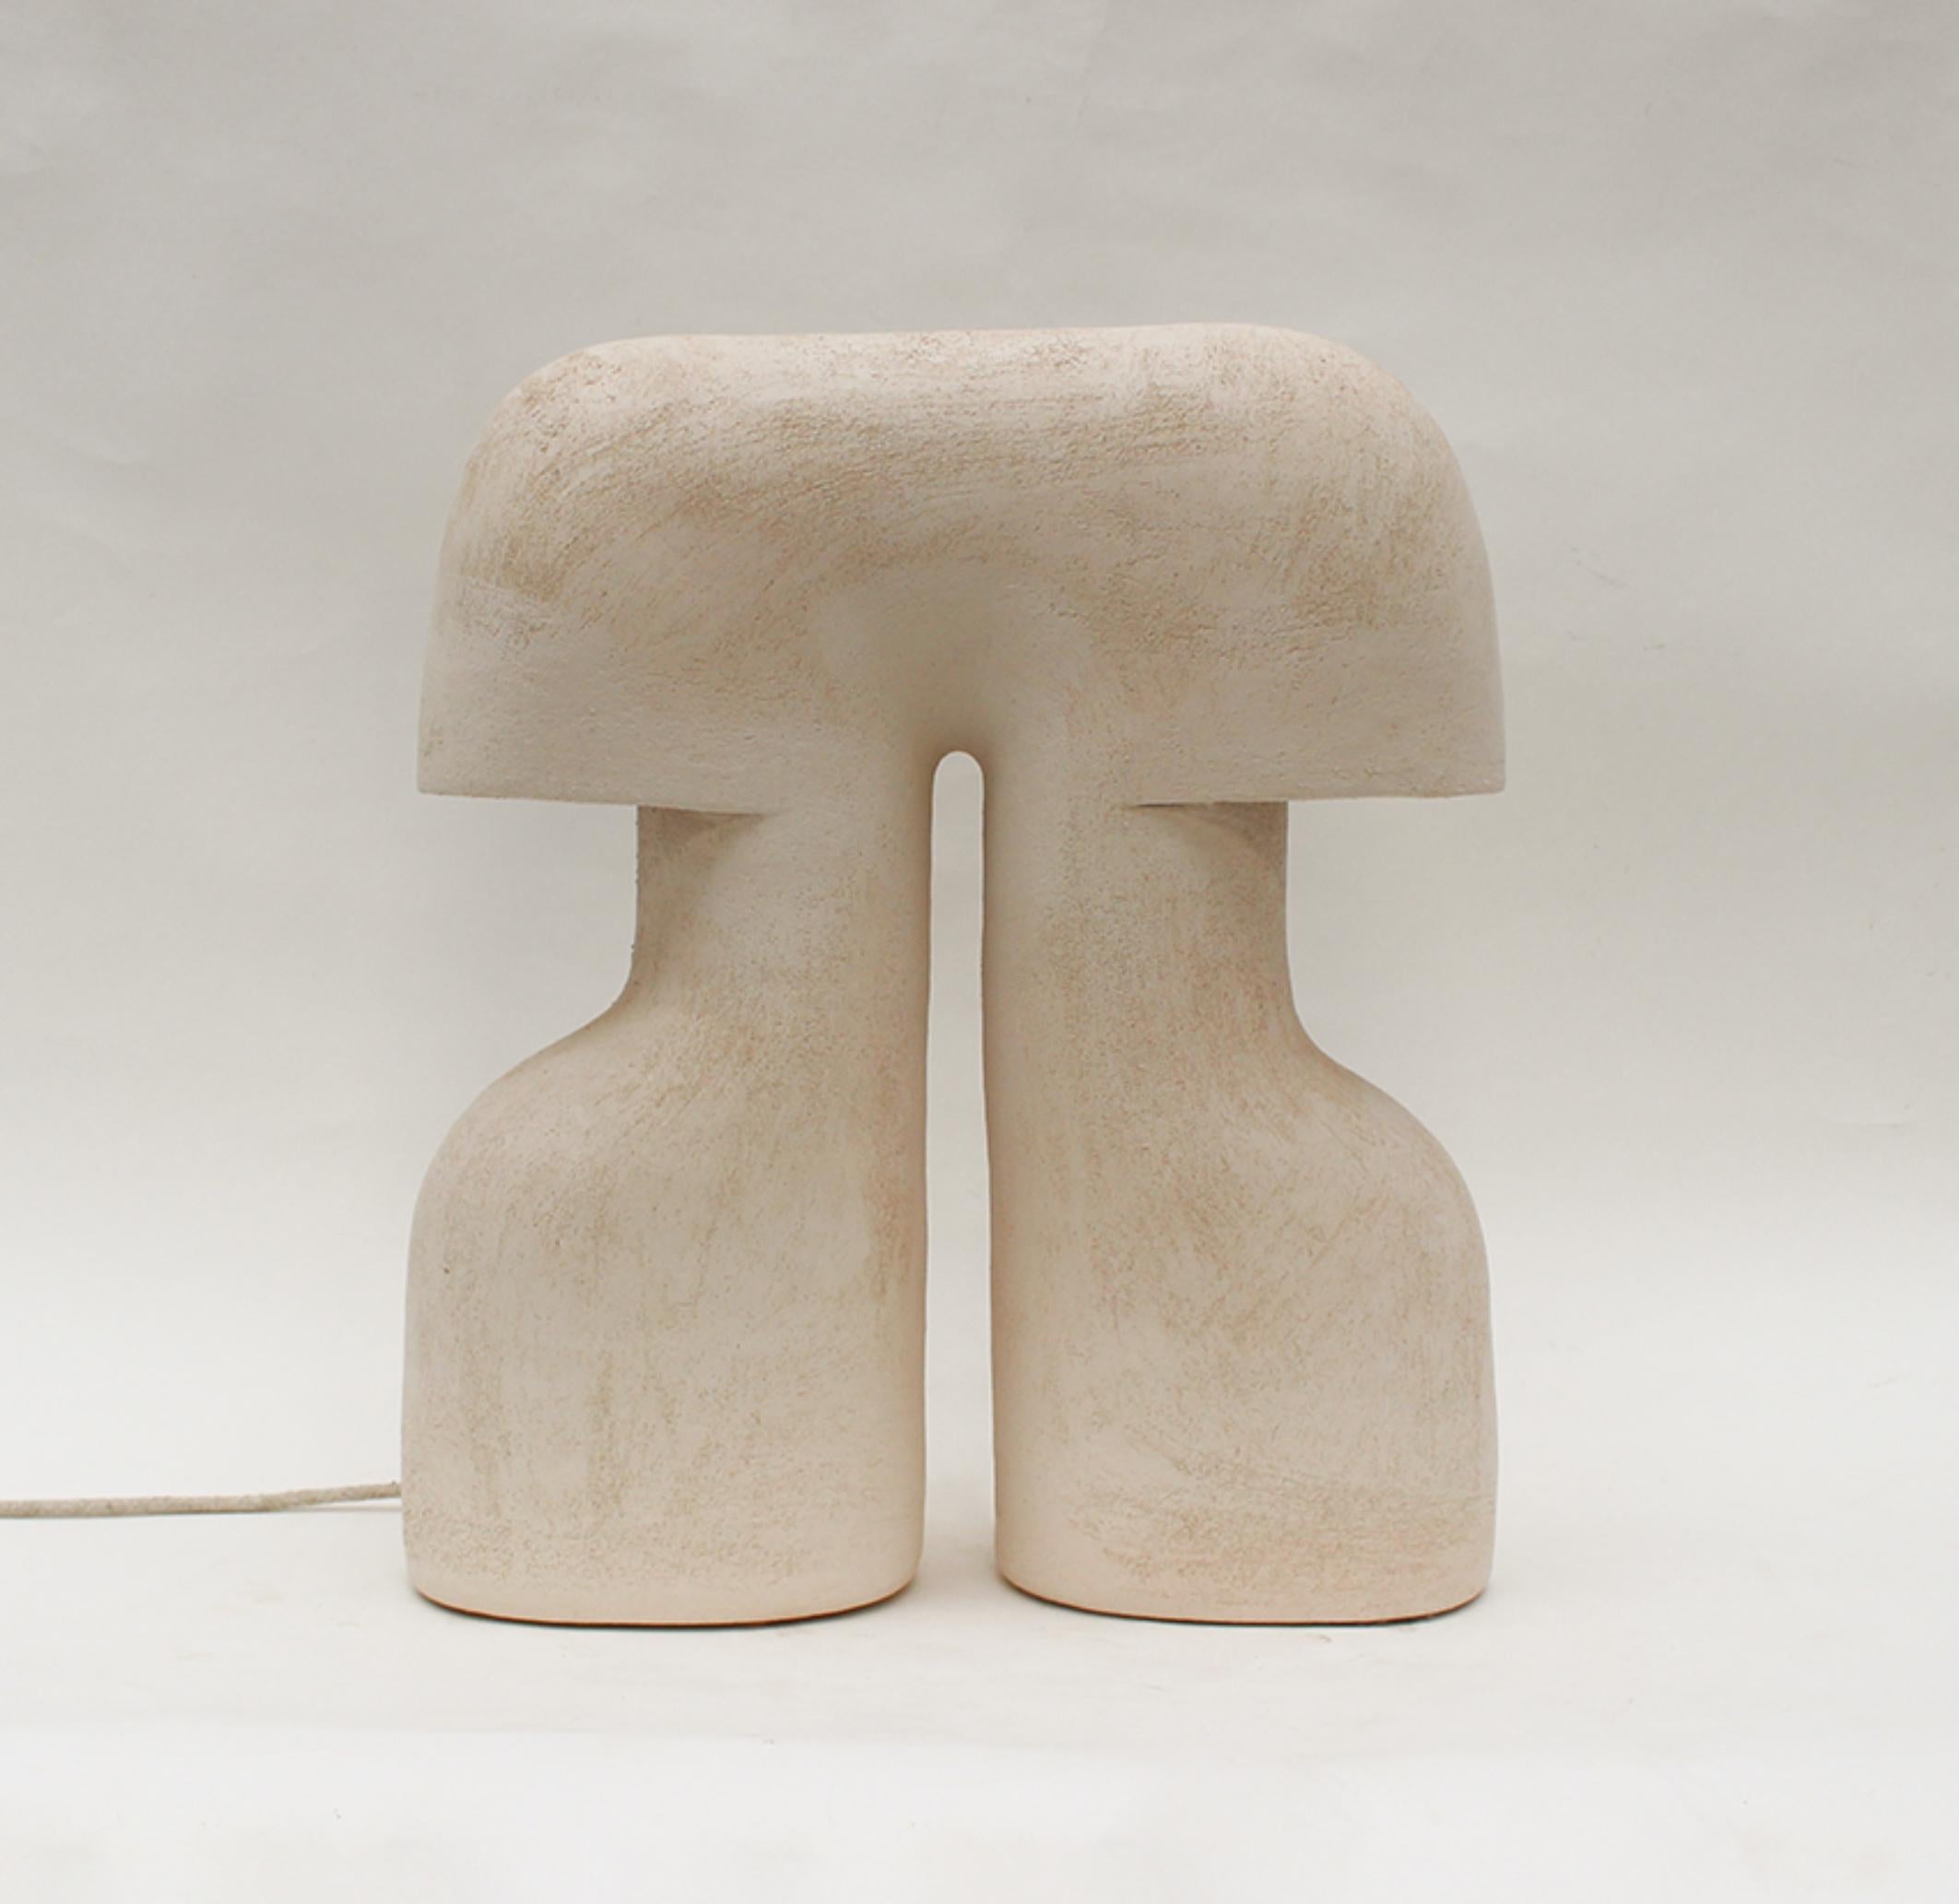 Edifice #45 Stoneware Lamp by Elisa Uberti
Limited series of 4 numbered copies
Dimensions: w 25 x d 10 x h 50 cm (approximately)
Materials: White stoneware
This product is handmade, dimensions may vary.


All our lamps can be wired according to each